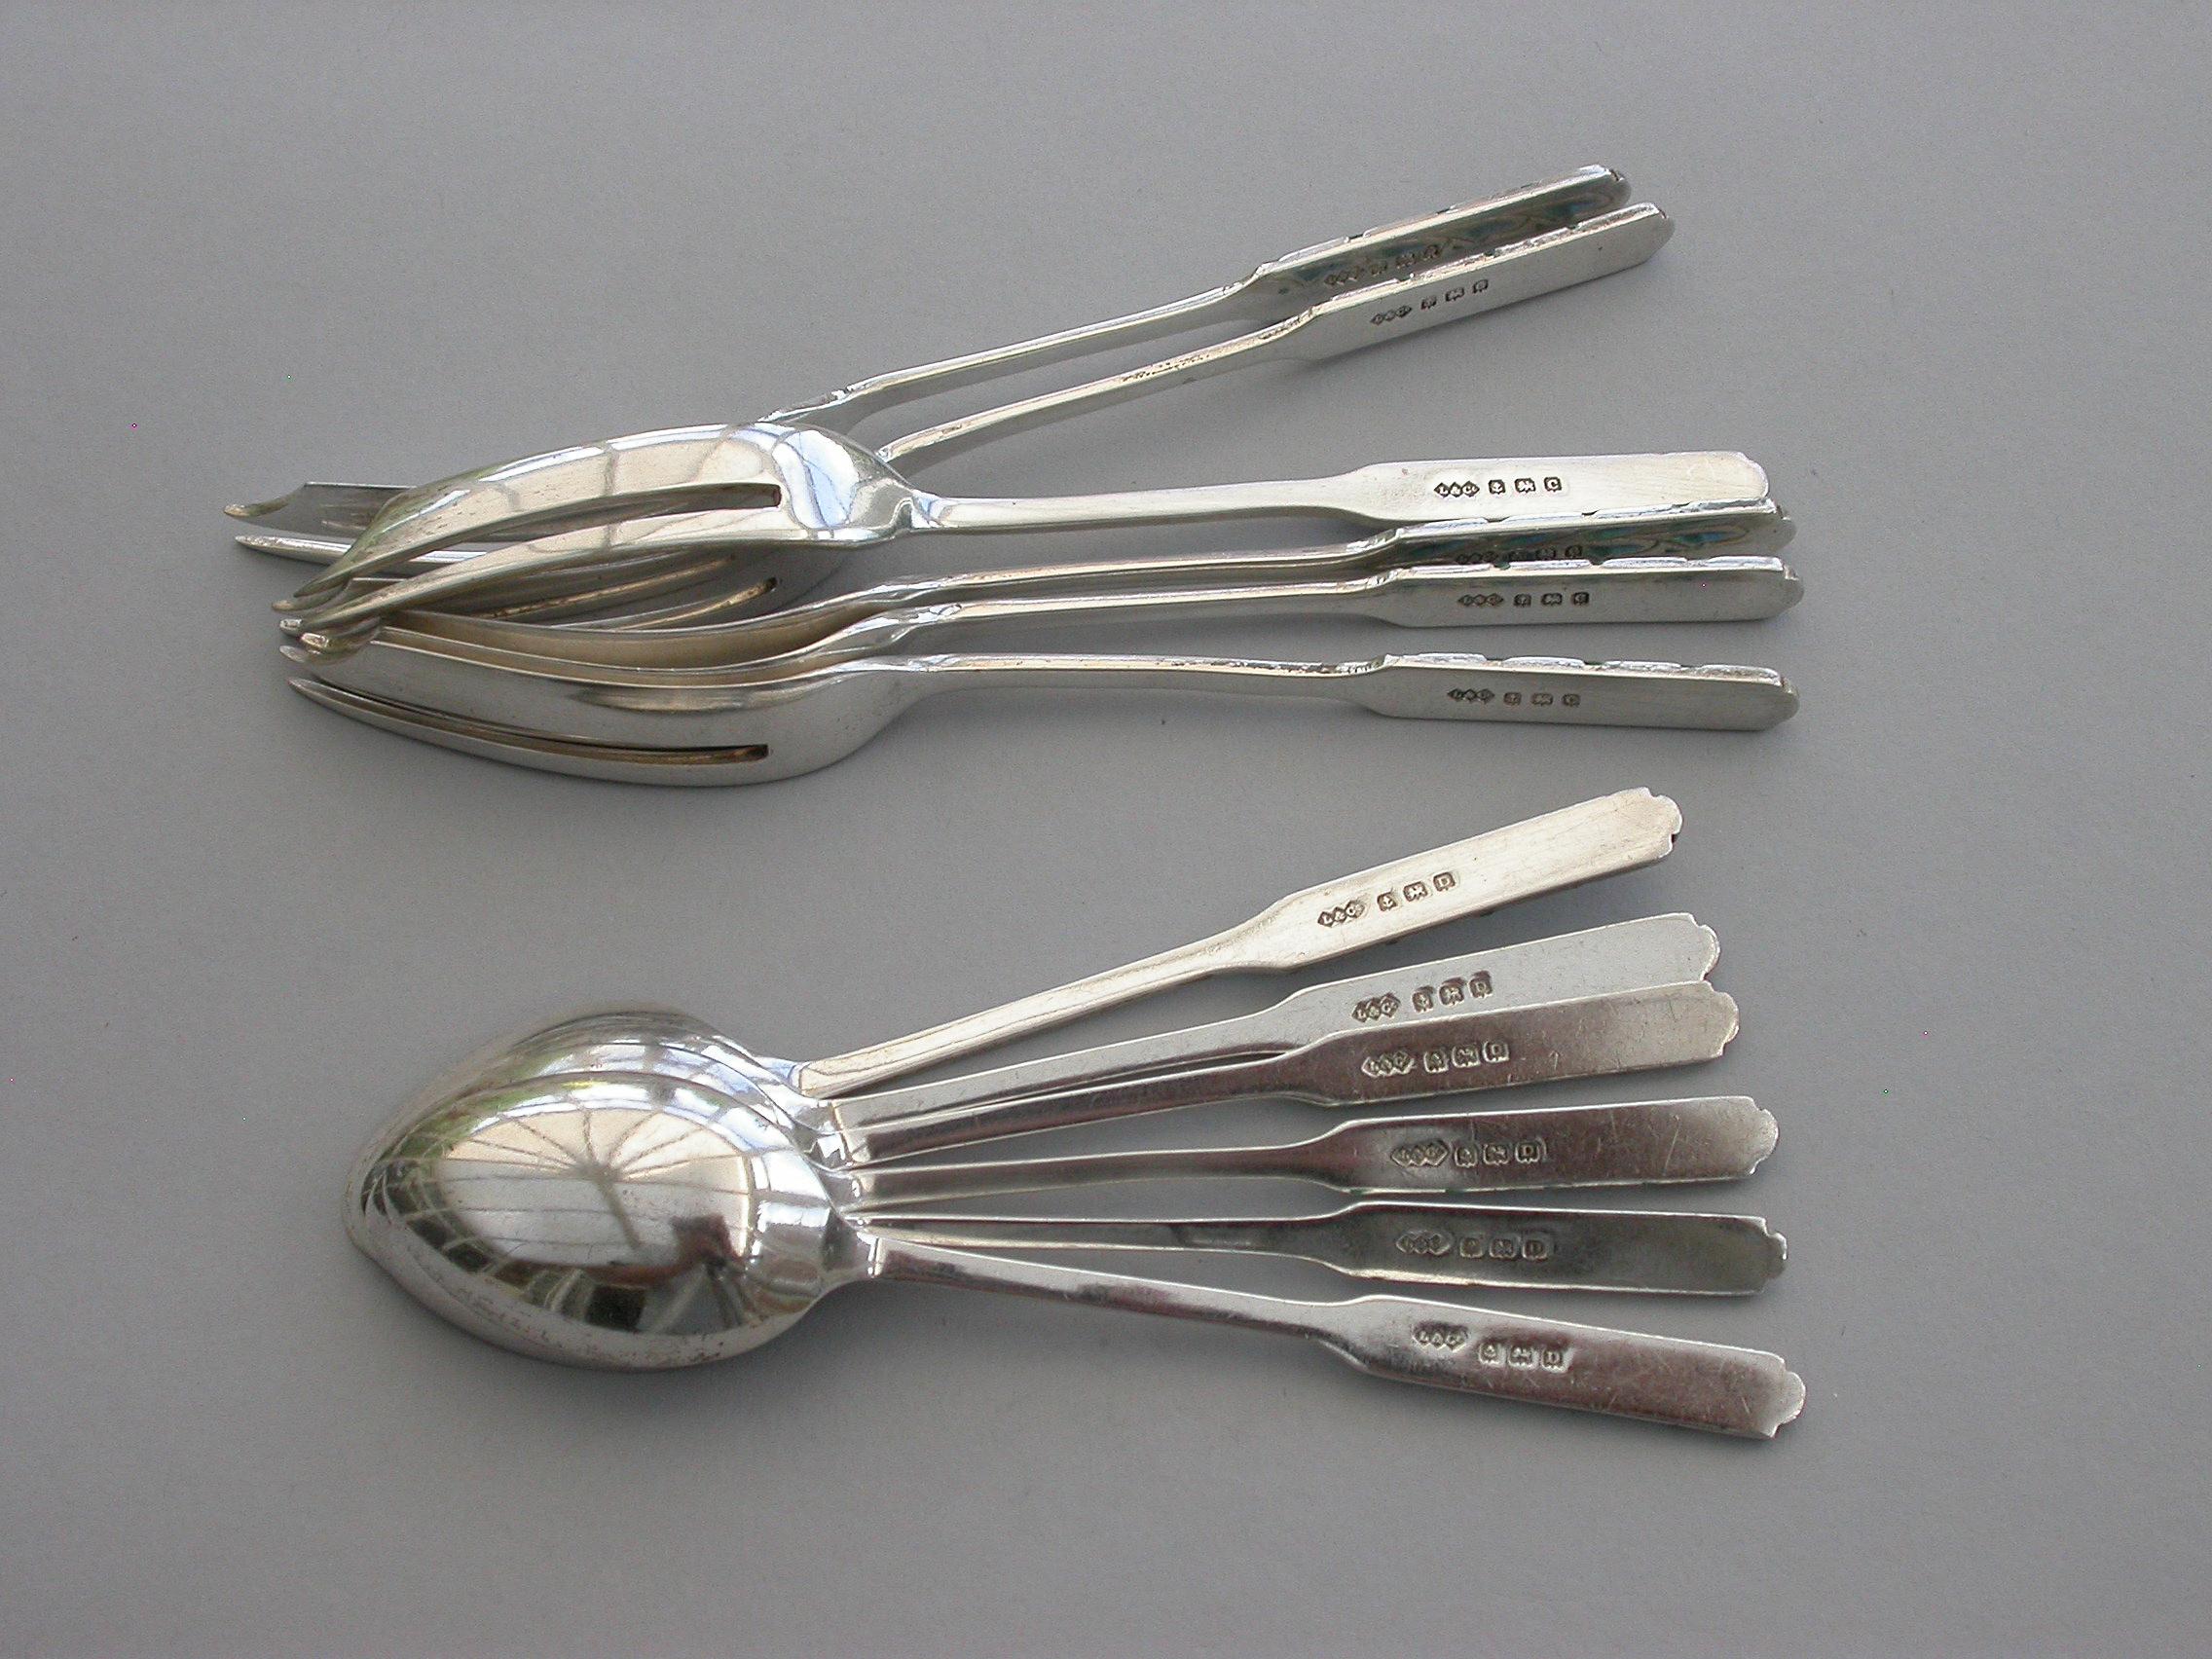 Cased Set 12 Silver and Enamel Pastry Spoons & Forks by Liberty & Co, 1927-1928 For Sale 3